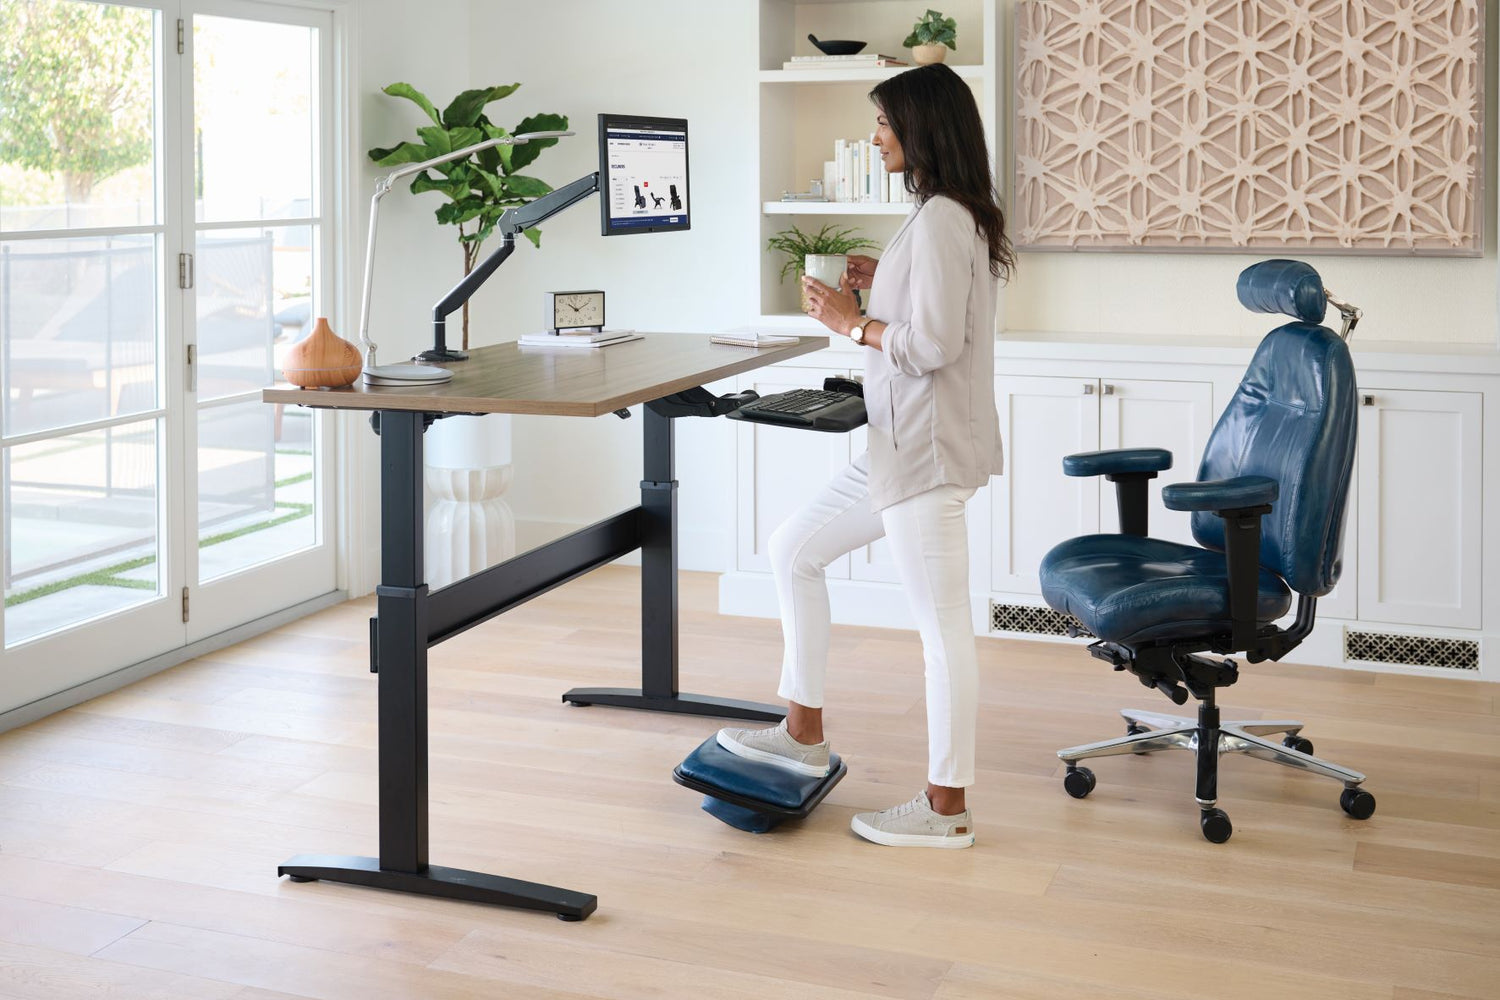 A woman standing with her foot on a footrest in front of the Transcend desk | Relax The Back